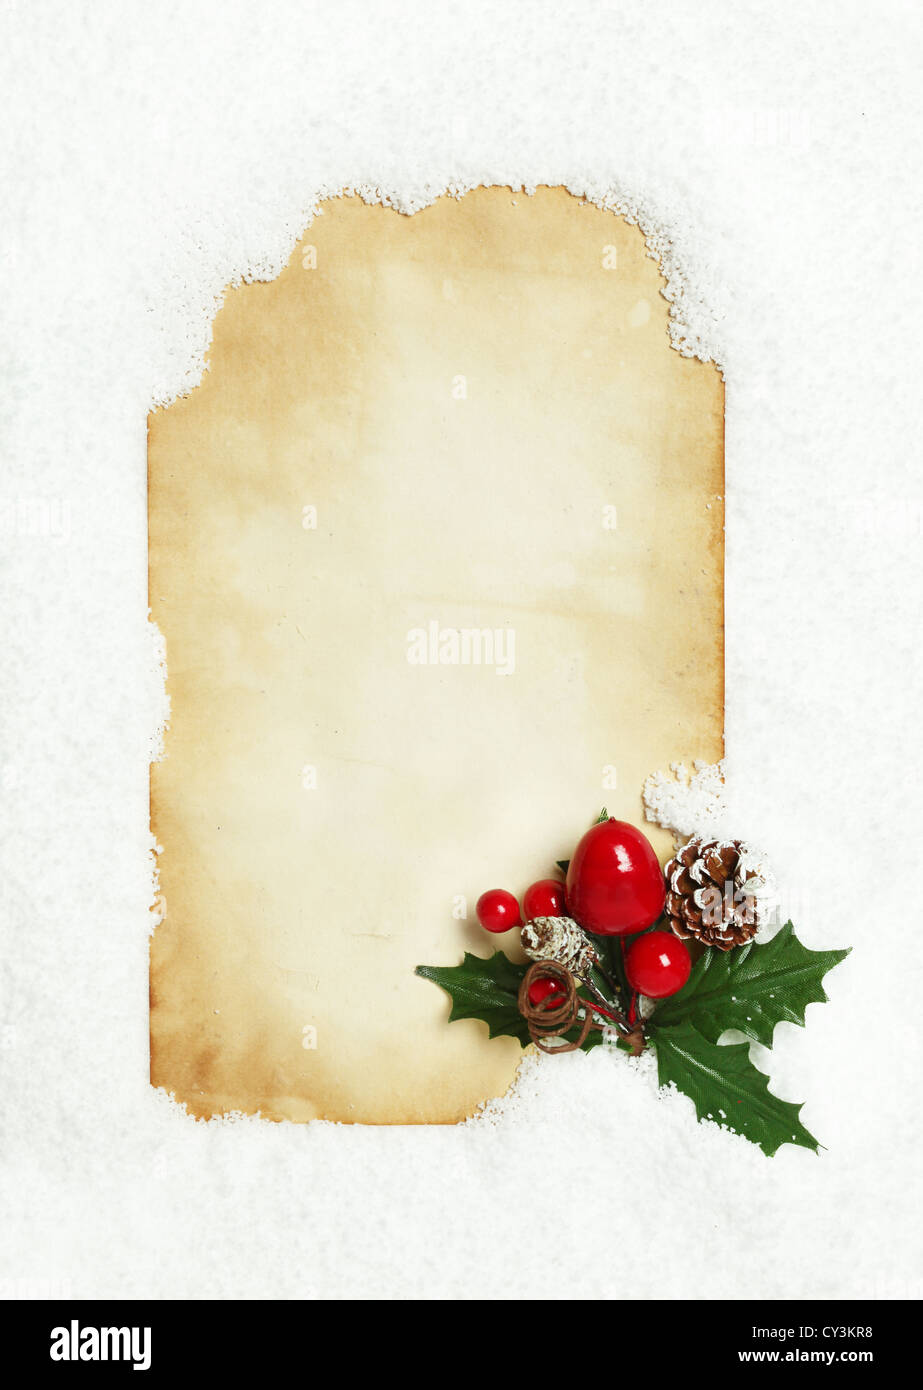 Letter To Santa With Sign, With Gold Christmas Snowflake Bauble  Decorations, Holly And Winter Greenery On Parchment Paper Over Oak  Background. Stock Photo, Picture and Royalty Free Image. Image 44258490.